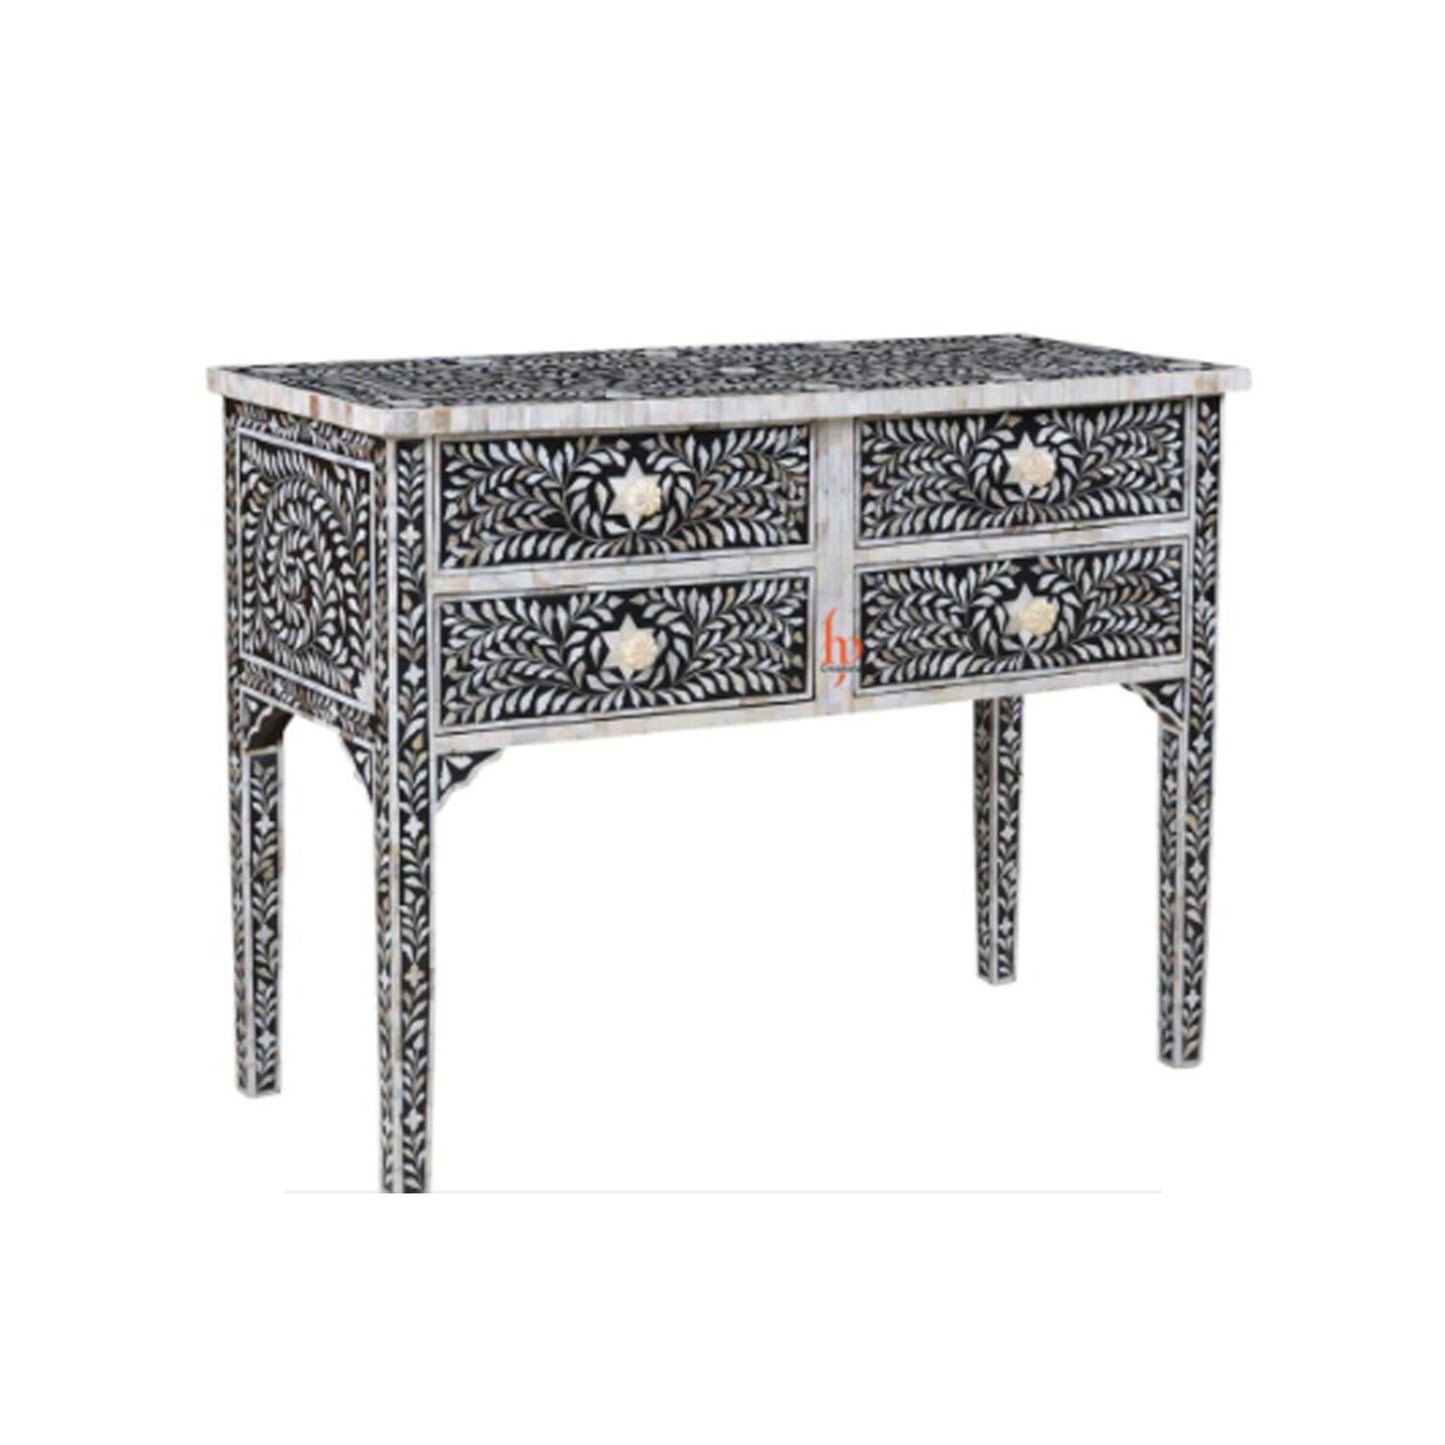 Handmade Mother Of Pearl Inlay Console with 4 Drawer Beautiful Floral Design Pretty Console Beautiful Entrance Table